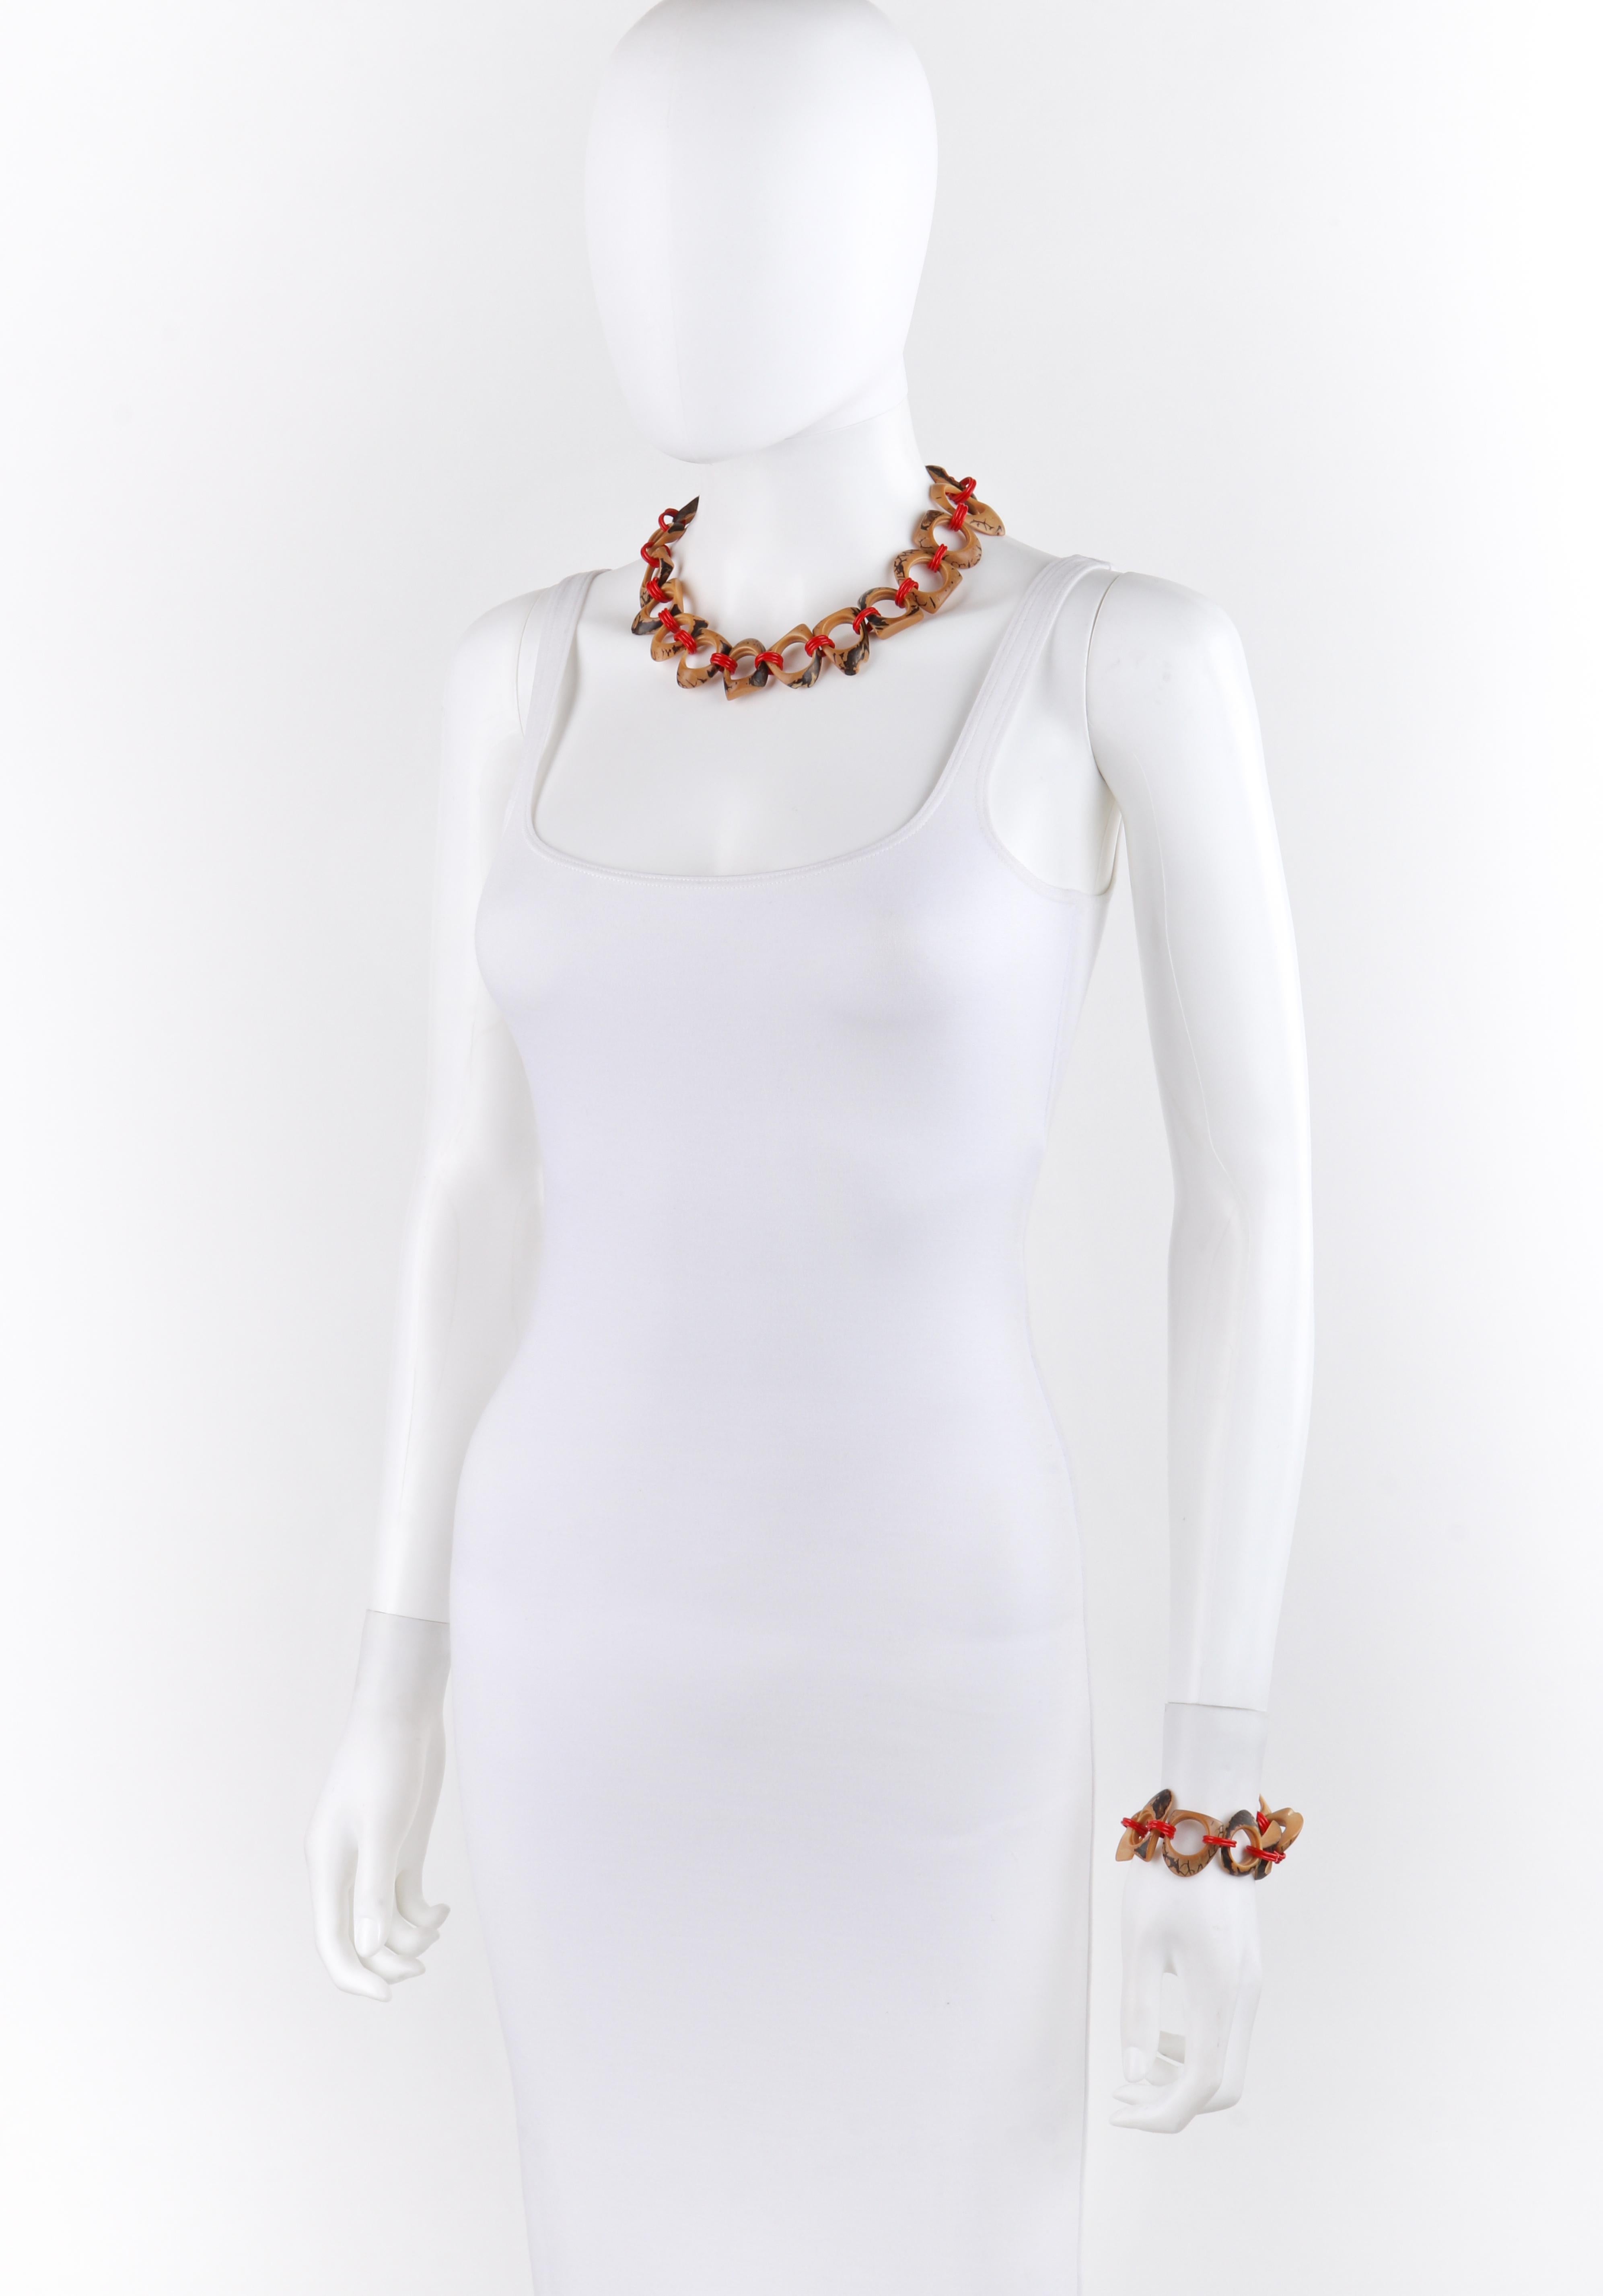 c.1940s-1950s Brown Red Plastic Abstract Sculpted (Carved Wood Look) Chain Necklace Bracelet Set
 
Circa: 1940s-1950s: 
Style: Chain bracelet and necklace set
Color(s): Chain: shades of brown; links: red
Unmarked Material (feel of):